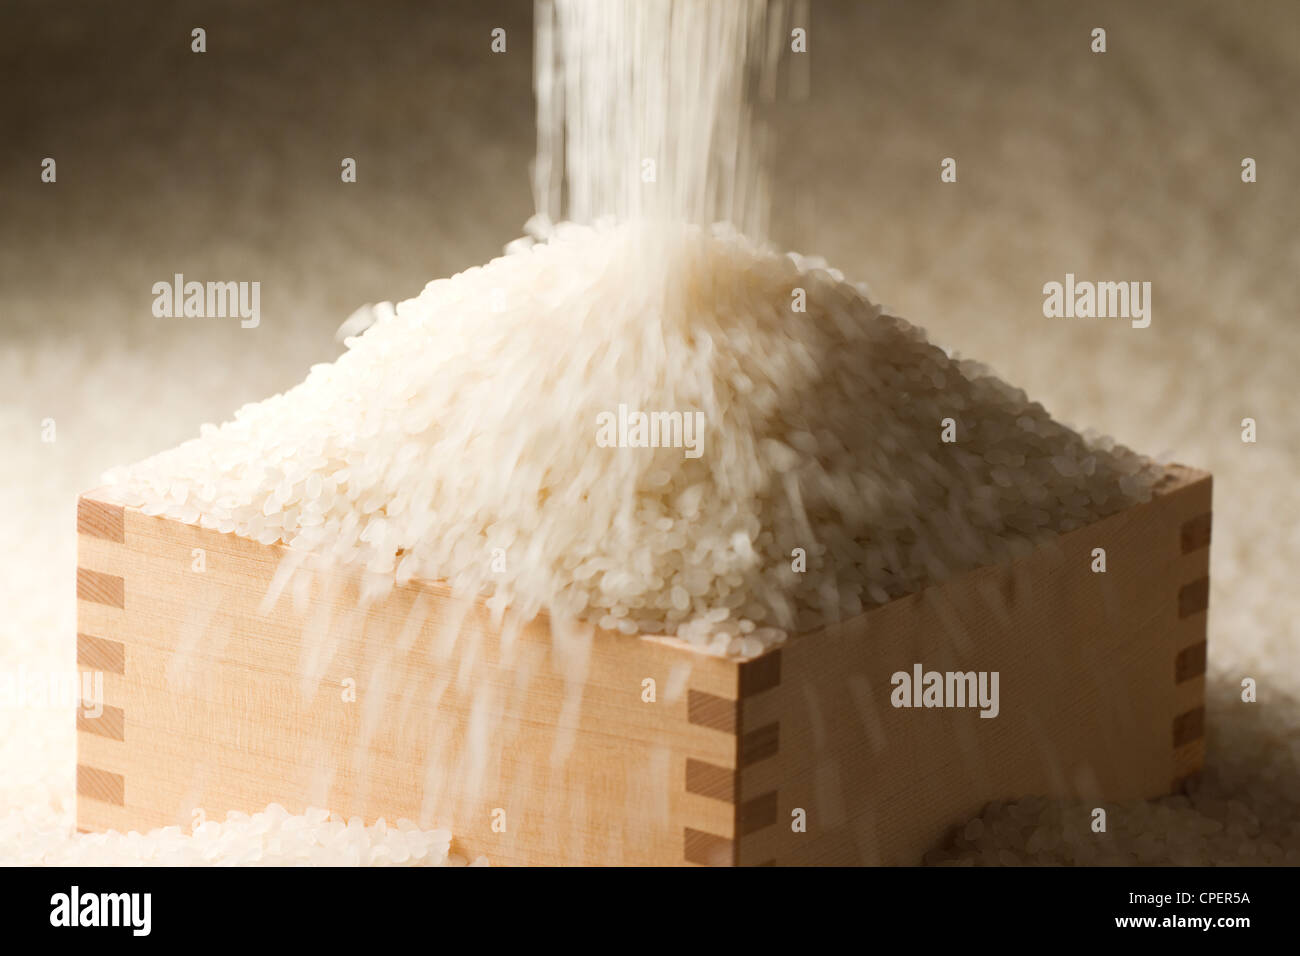 Rice Overflowing From Wooden Box Stock Photo